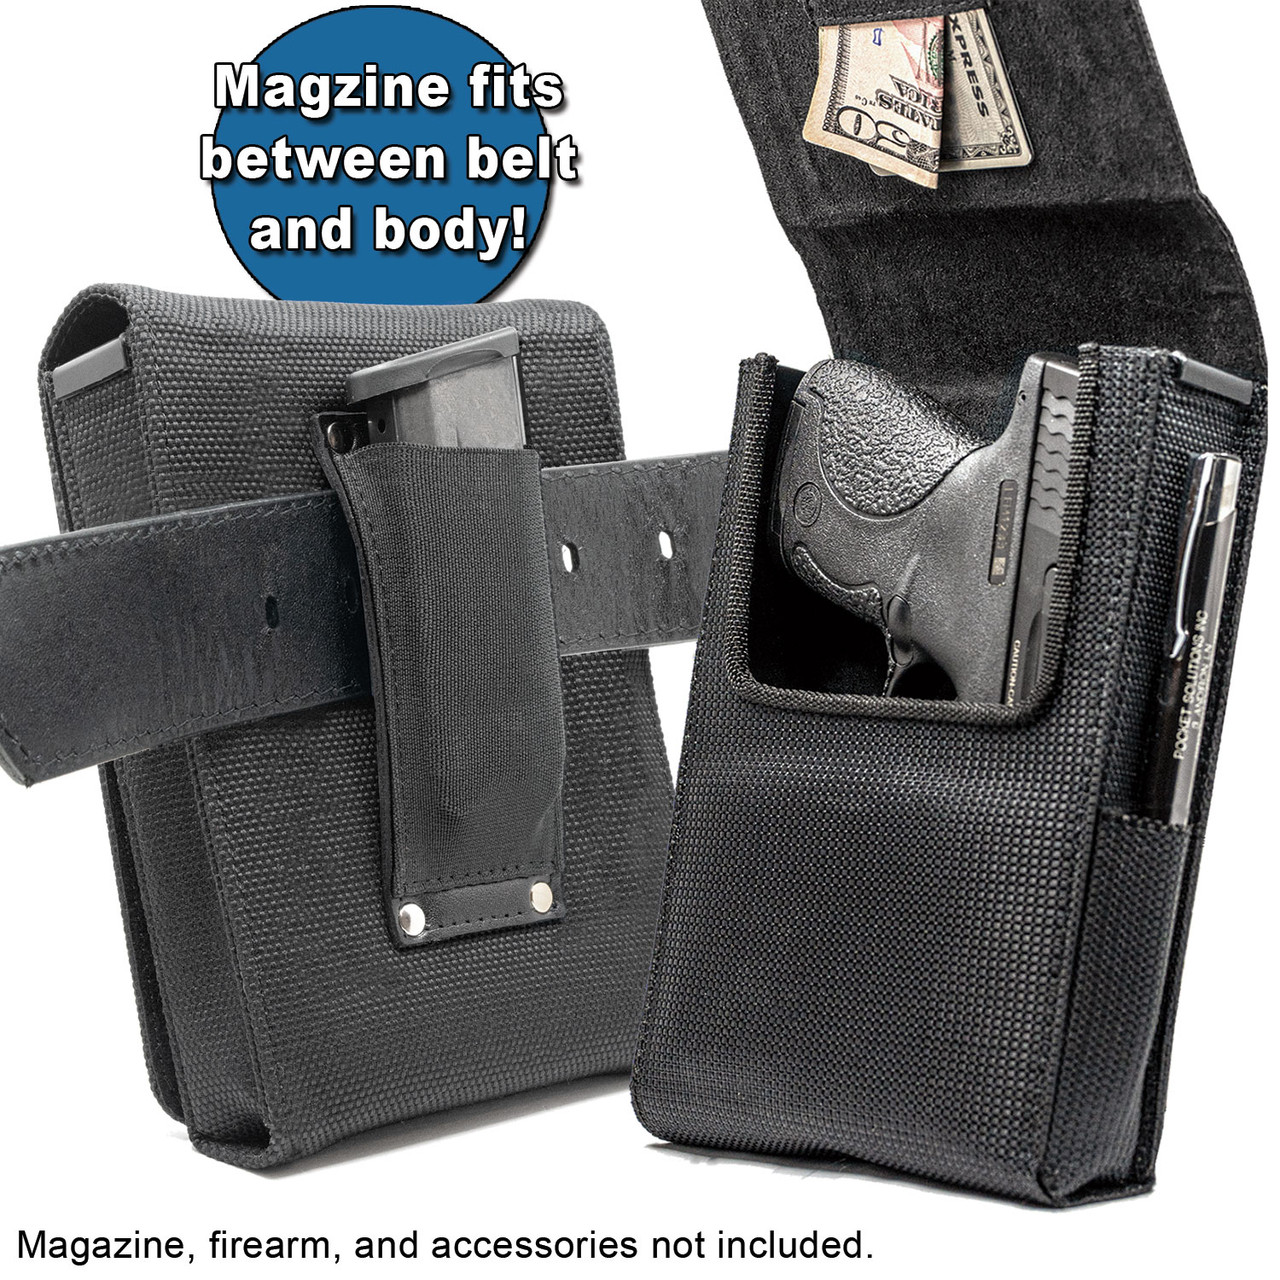 The Springfield XD9sc Max Defense Holster